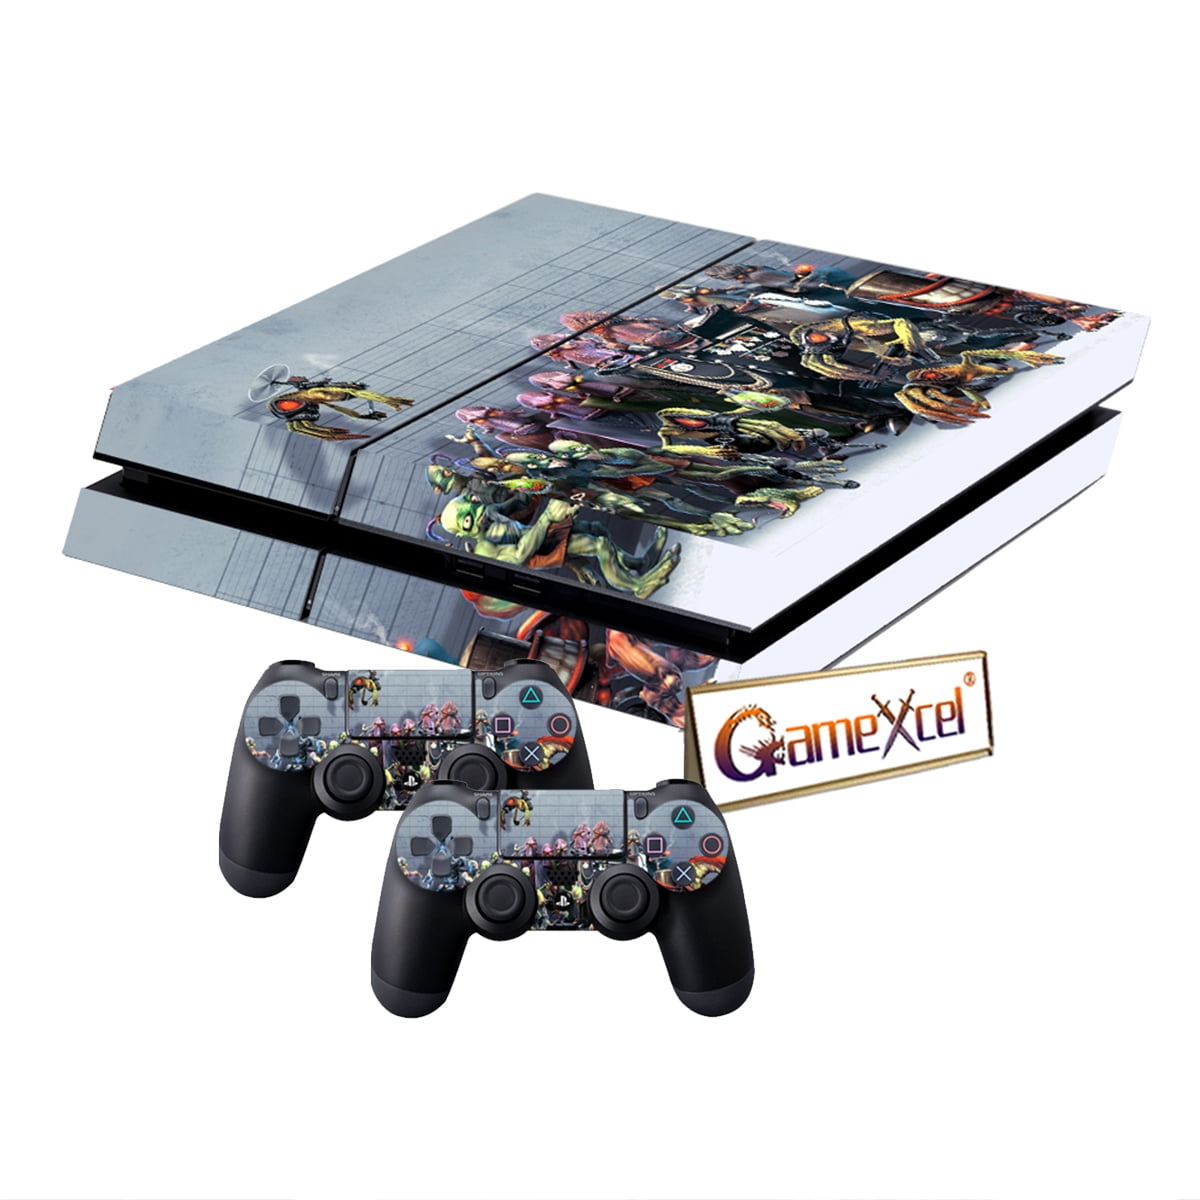 906 Vinyl Decal Skin Sticker for Xbox360 Slim E and 2 controller skins